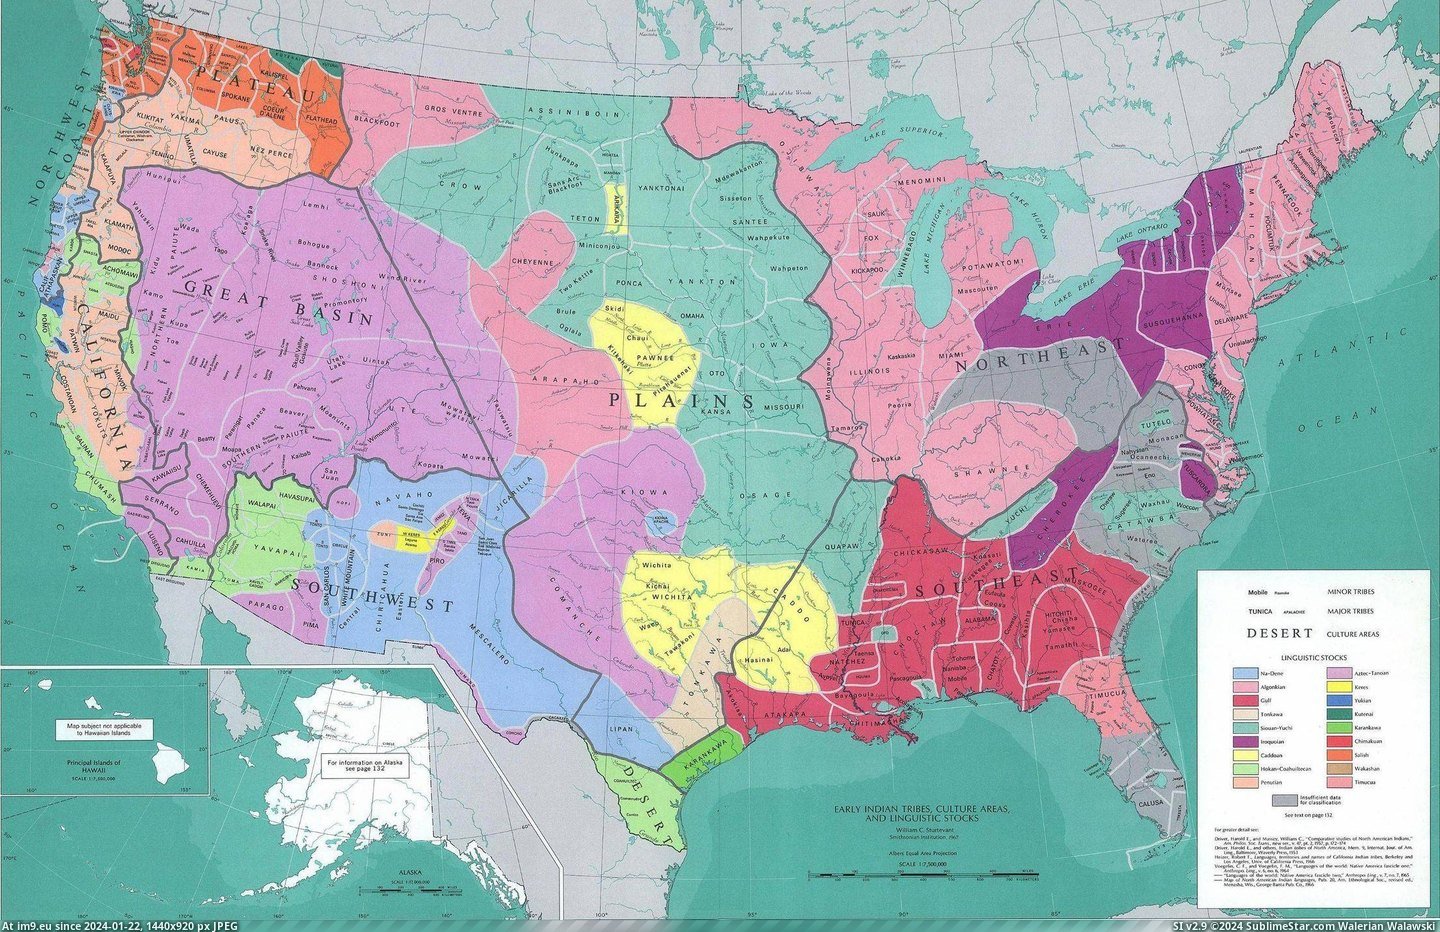 #American #Early #Language #Native #Usa #Regions [Mapporn] Early Native American language regions in the USA. [2211 x 1425] Pic. (Image of album My r/MAPS favs))